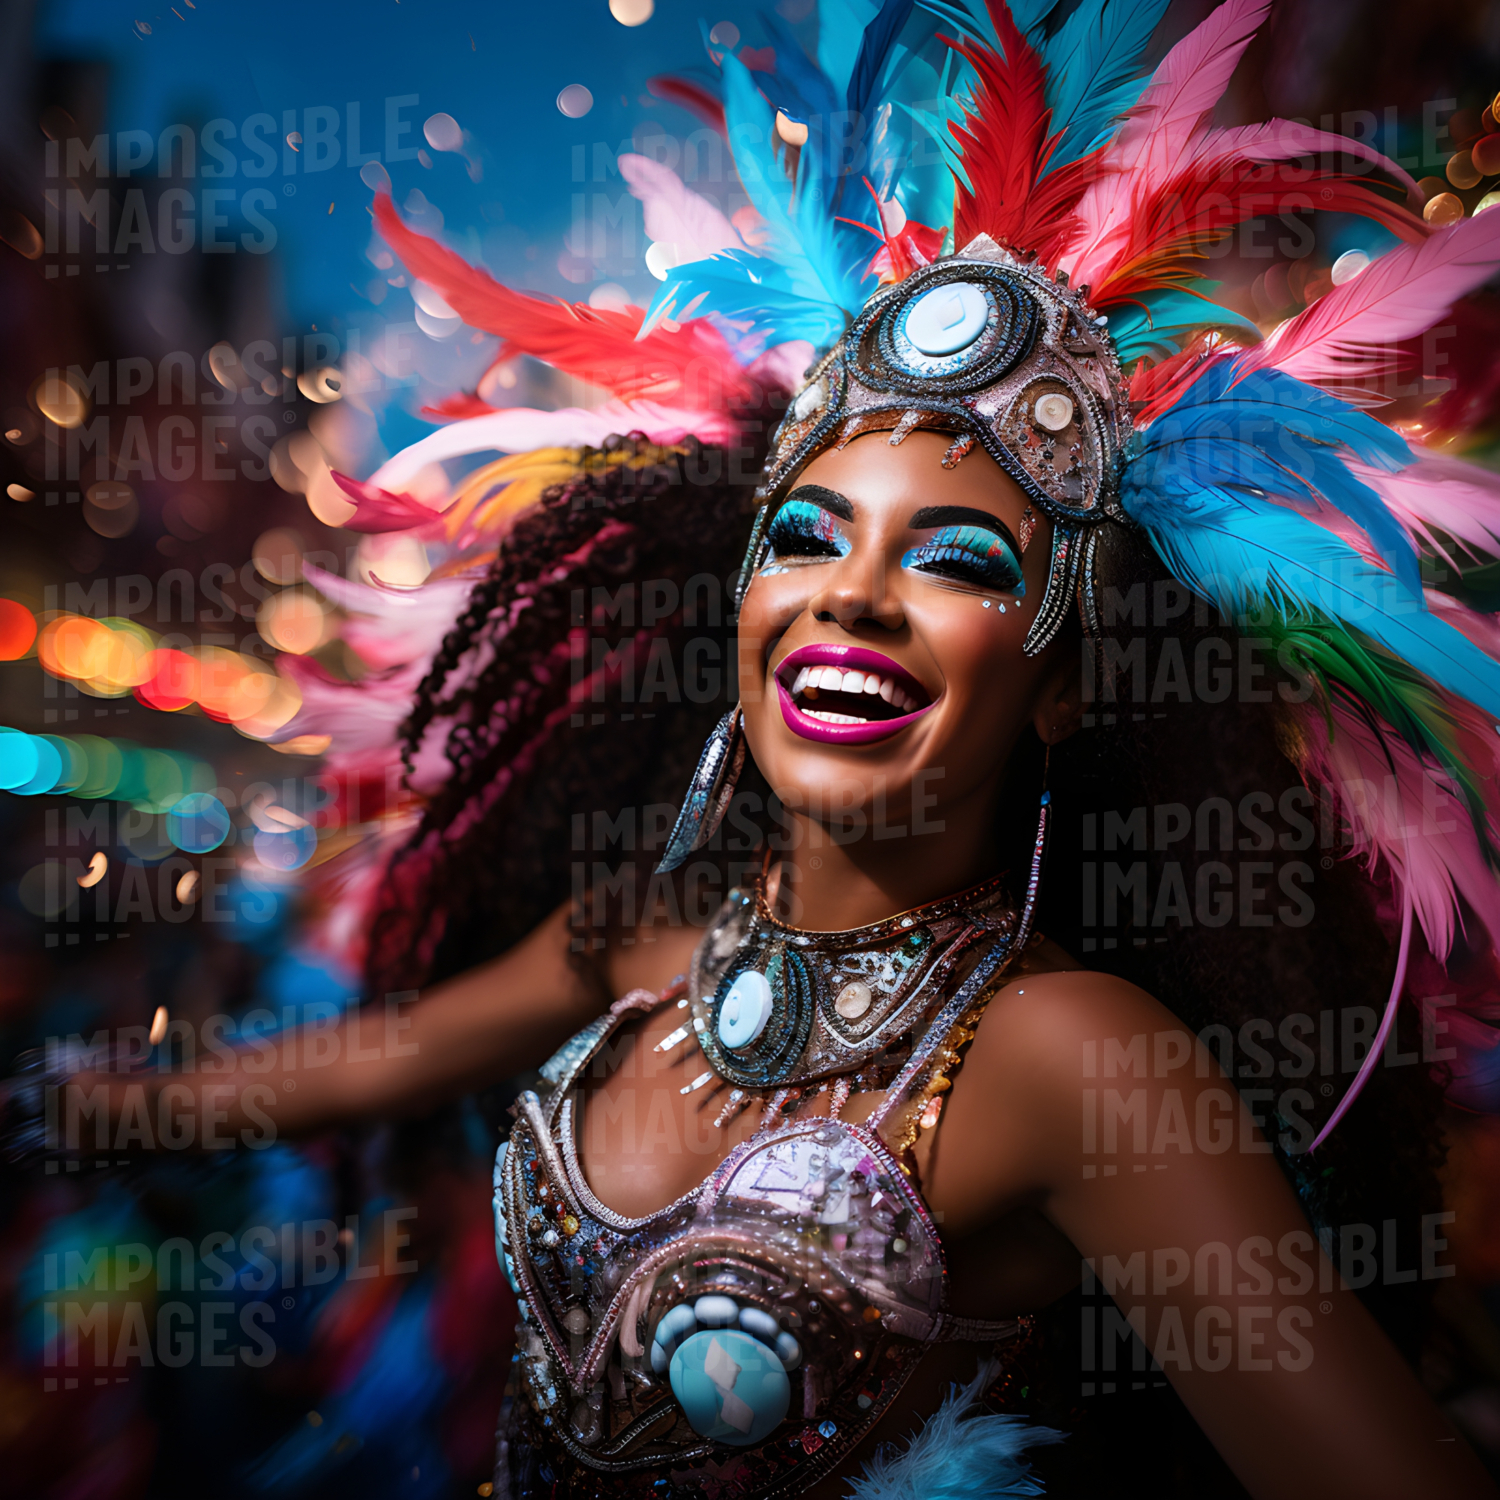 A dancer in Brazil in an elaborate feathered headpiece